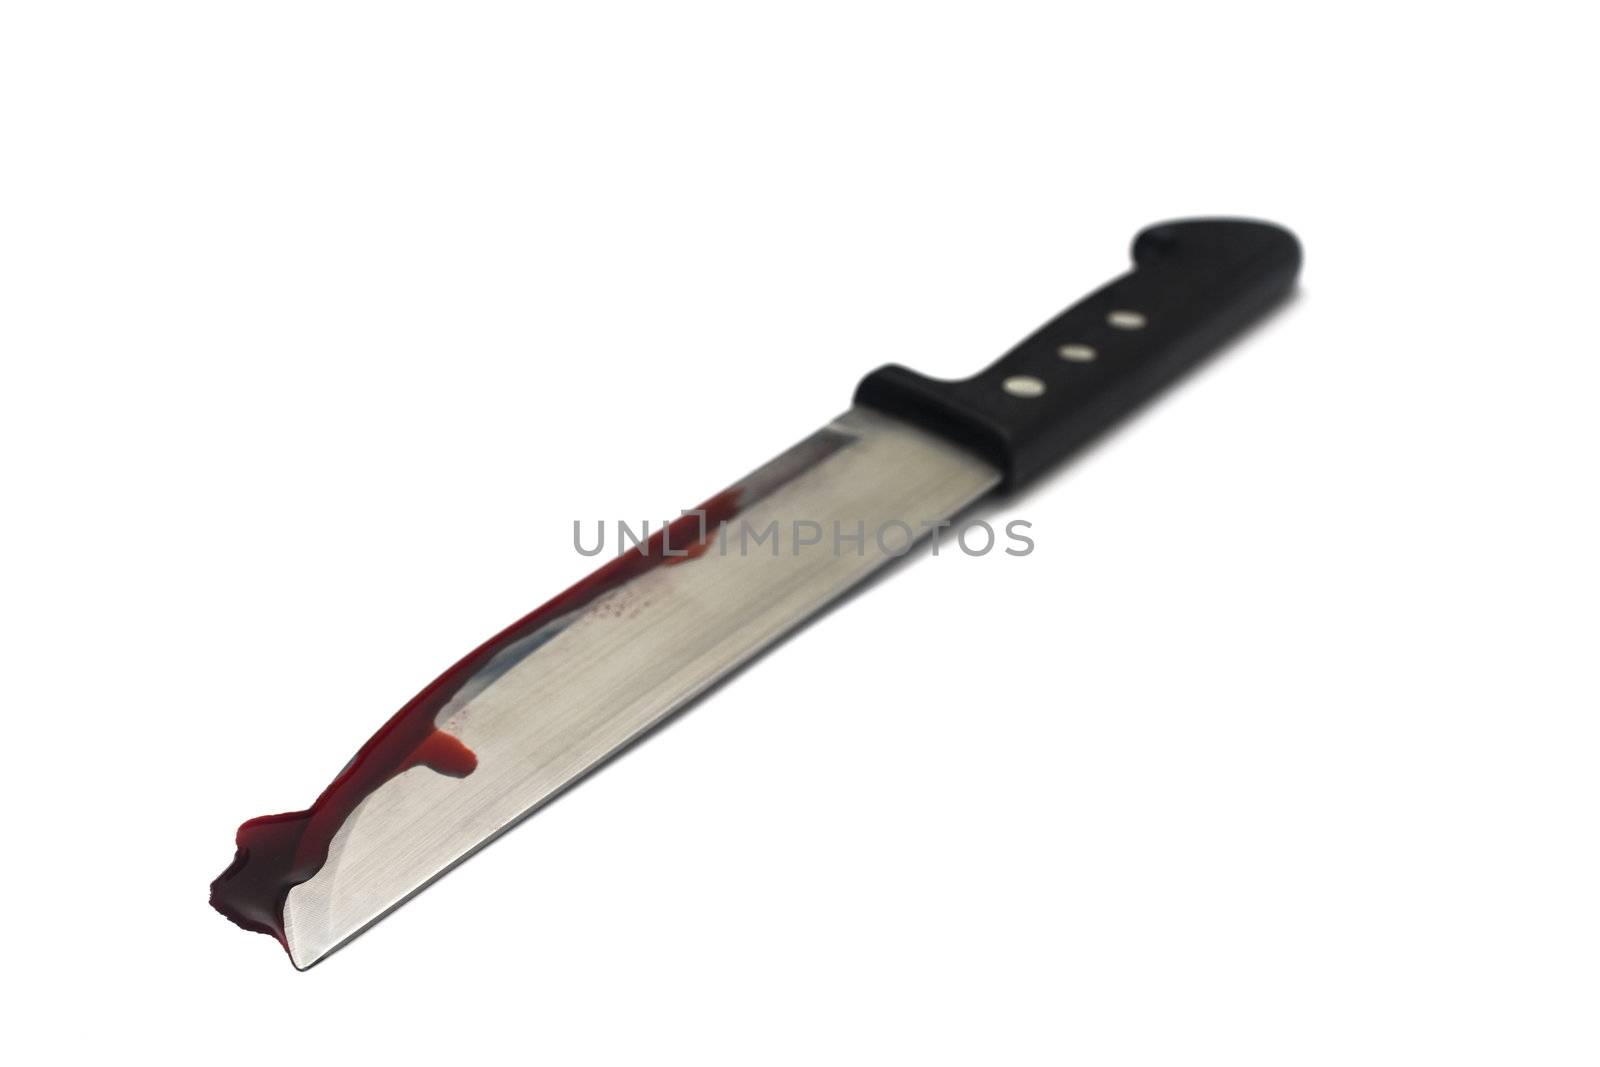 A bloody knife, isolated on white. This image has innumerous uses like accidents, domestic violence, suicide, murder, etc...